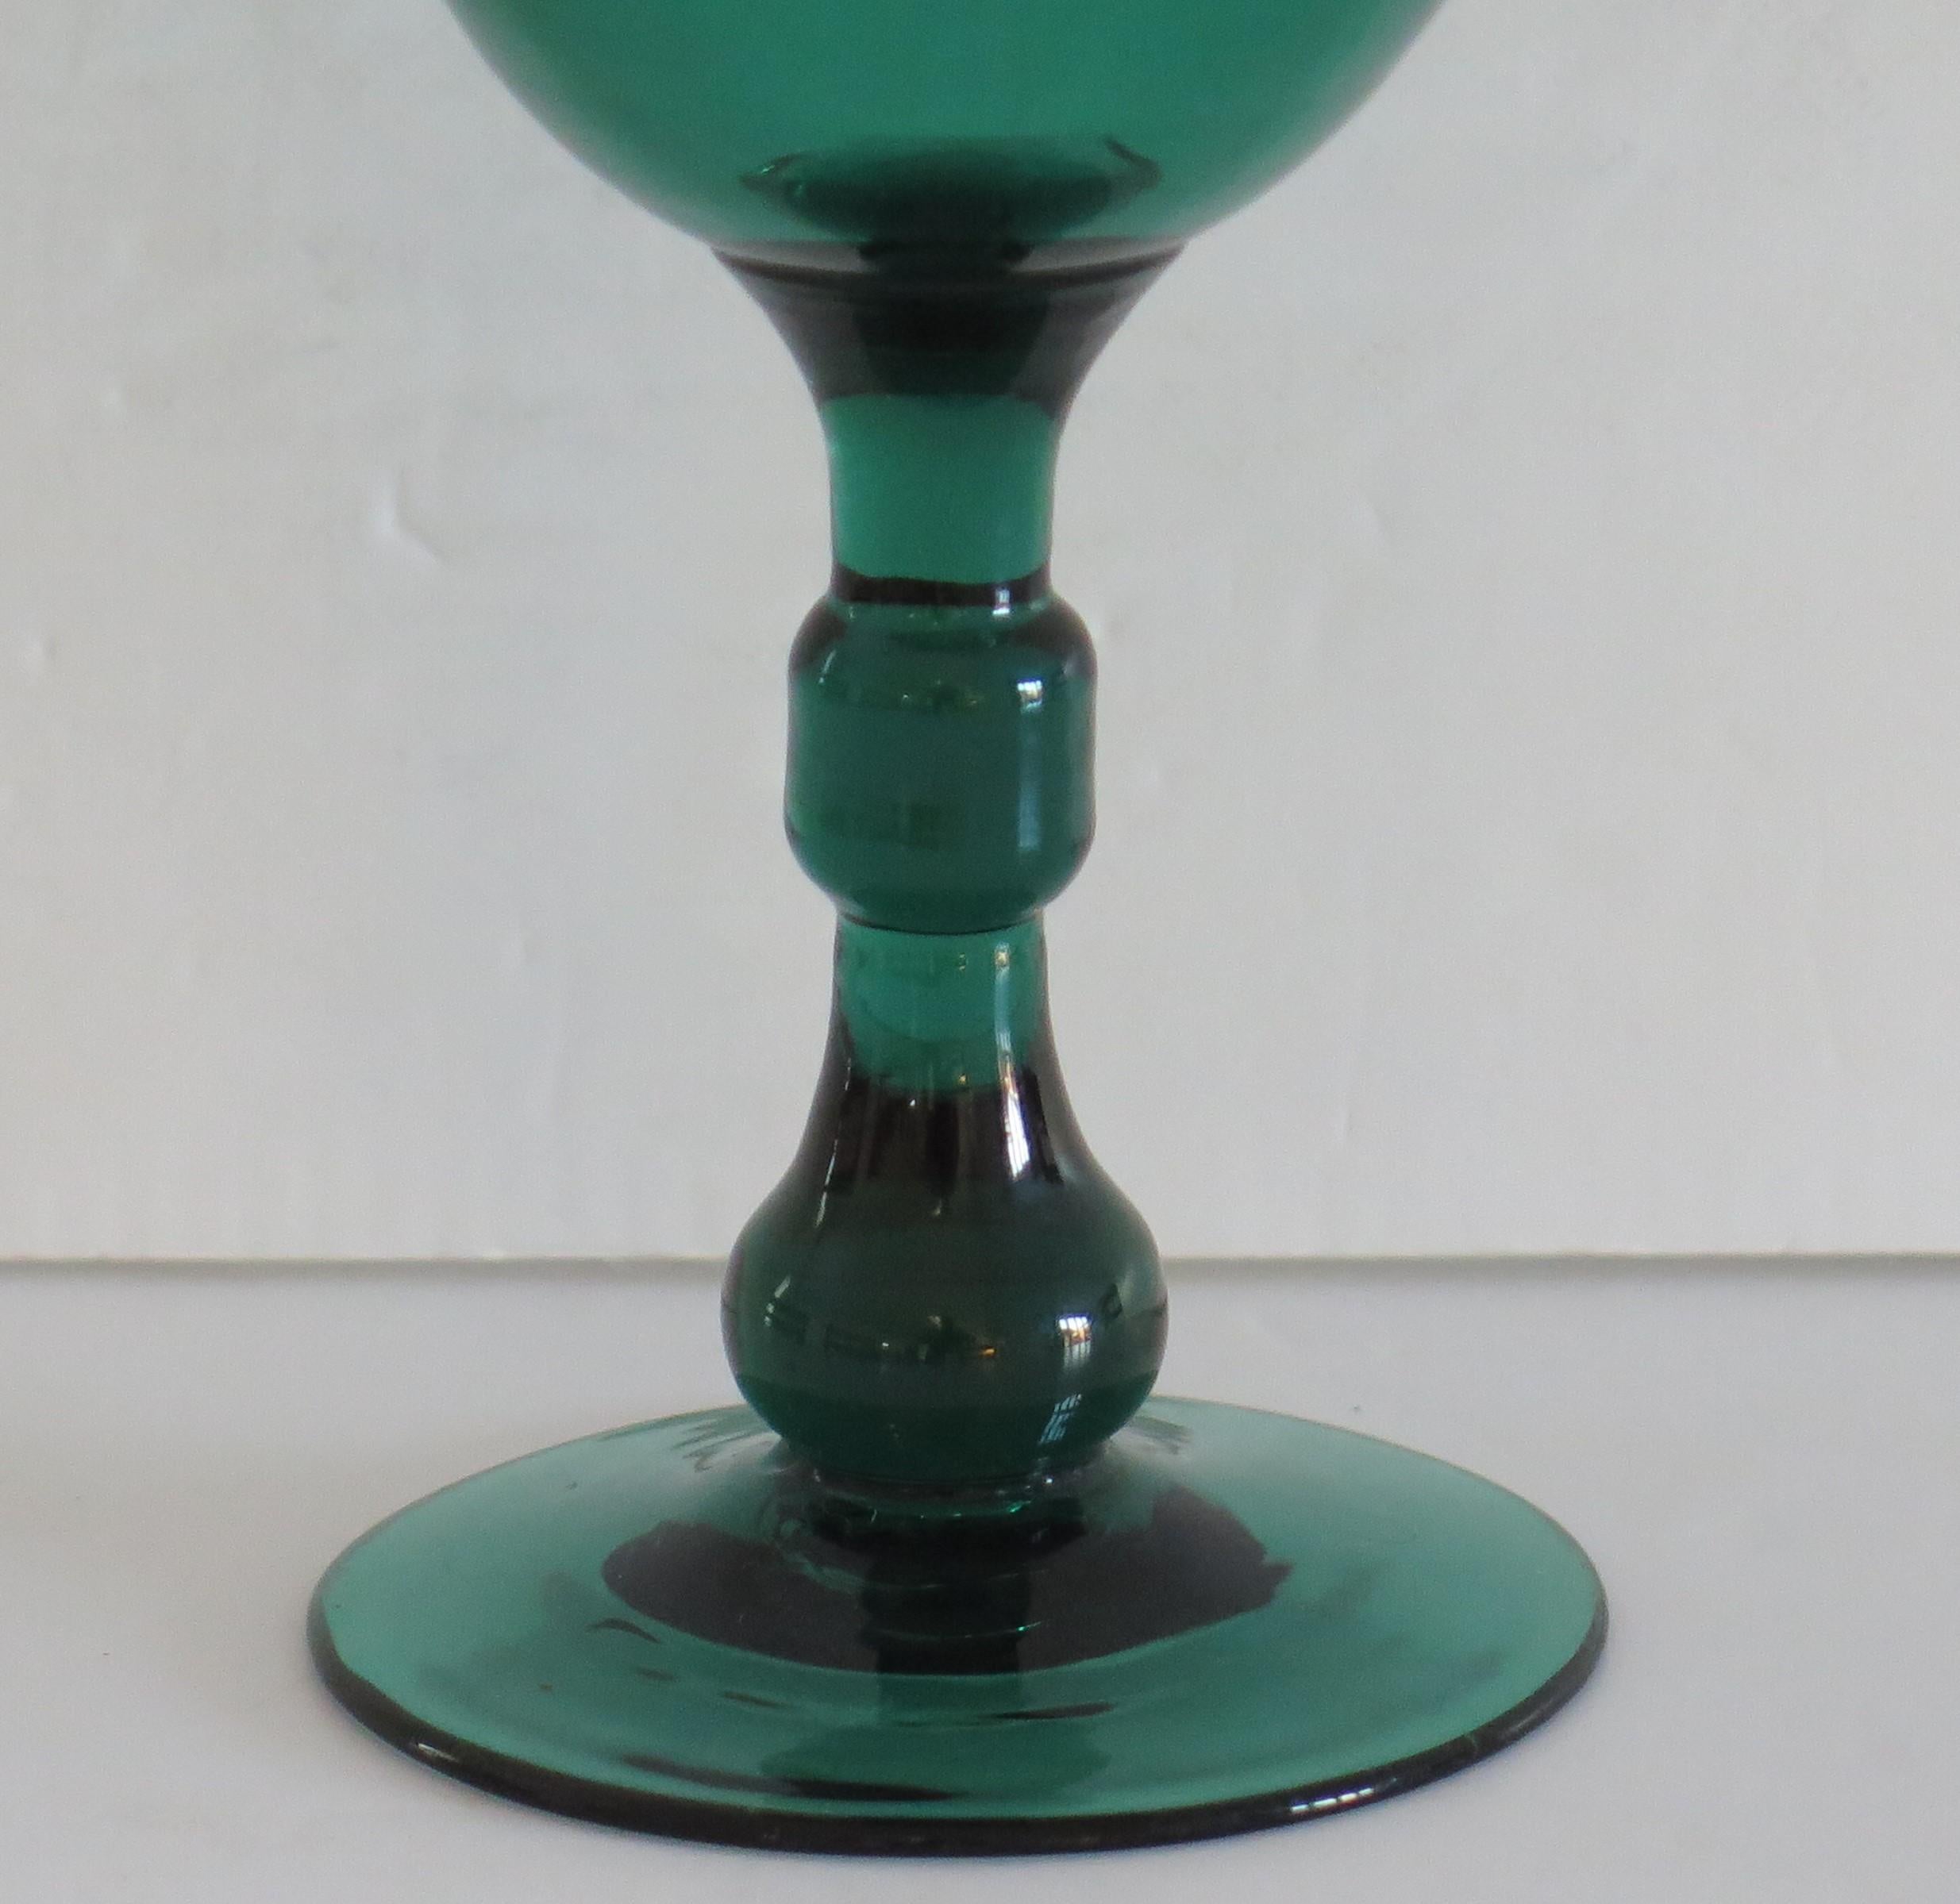 conical wine glass with lines